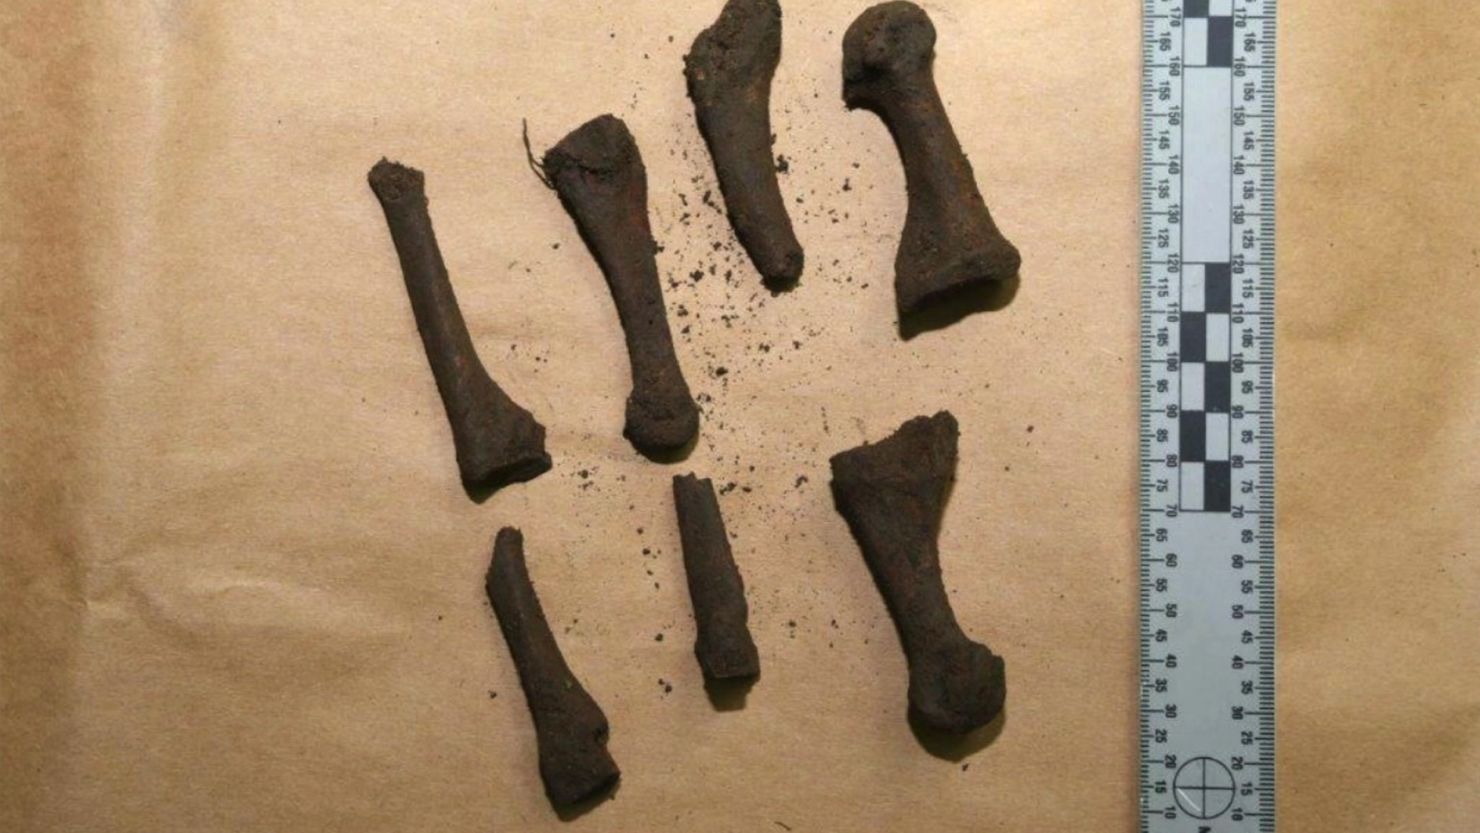 The bones could be from the Hopewell or the Delaware tribes, experts told CNN affiliate WJW-TV.